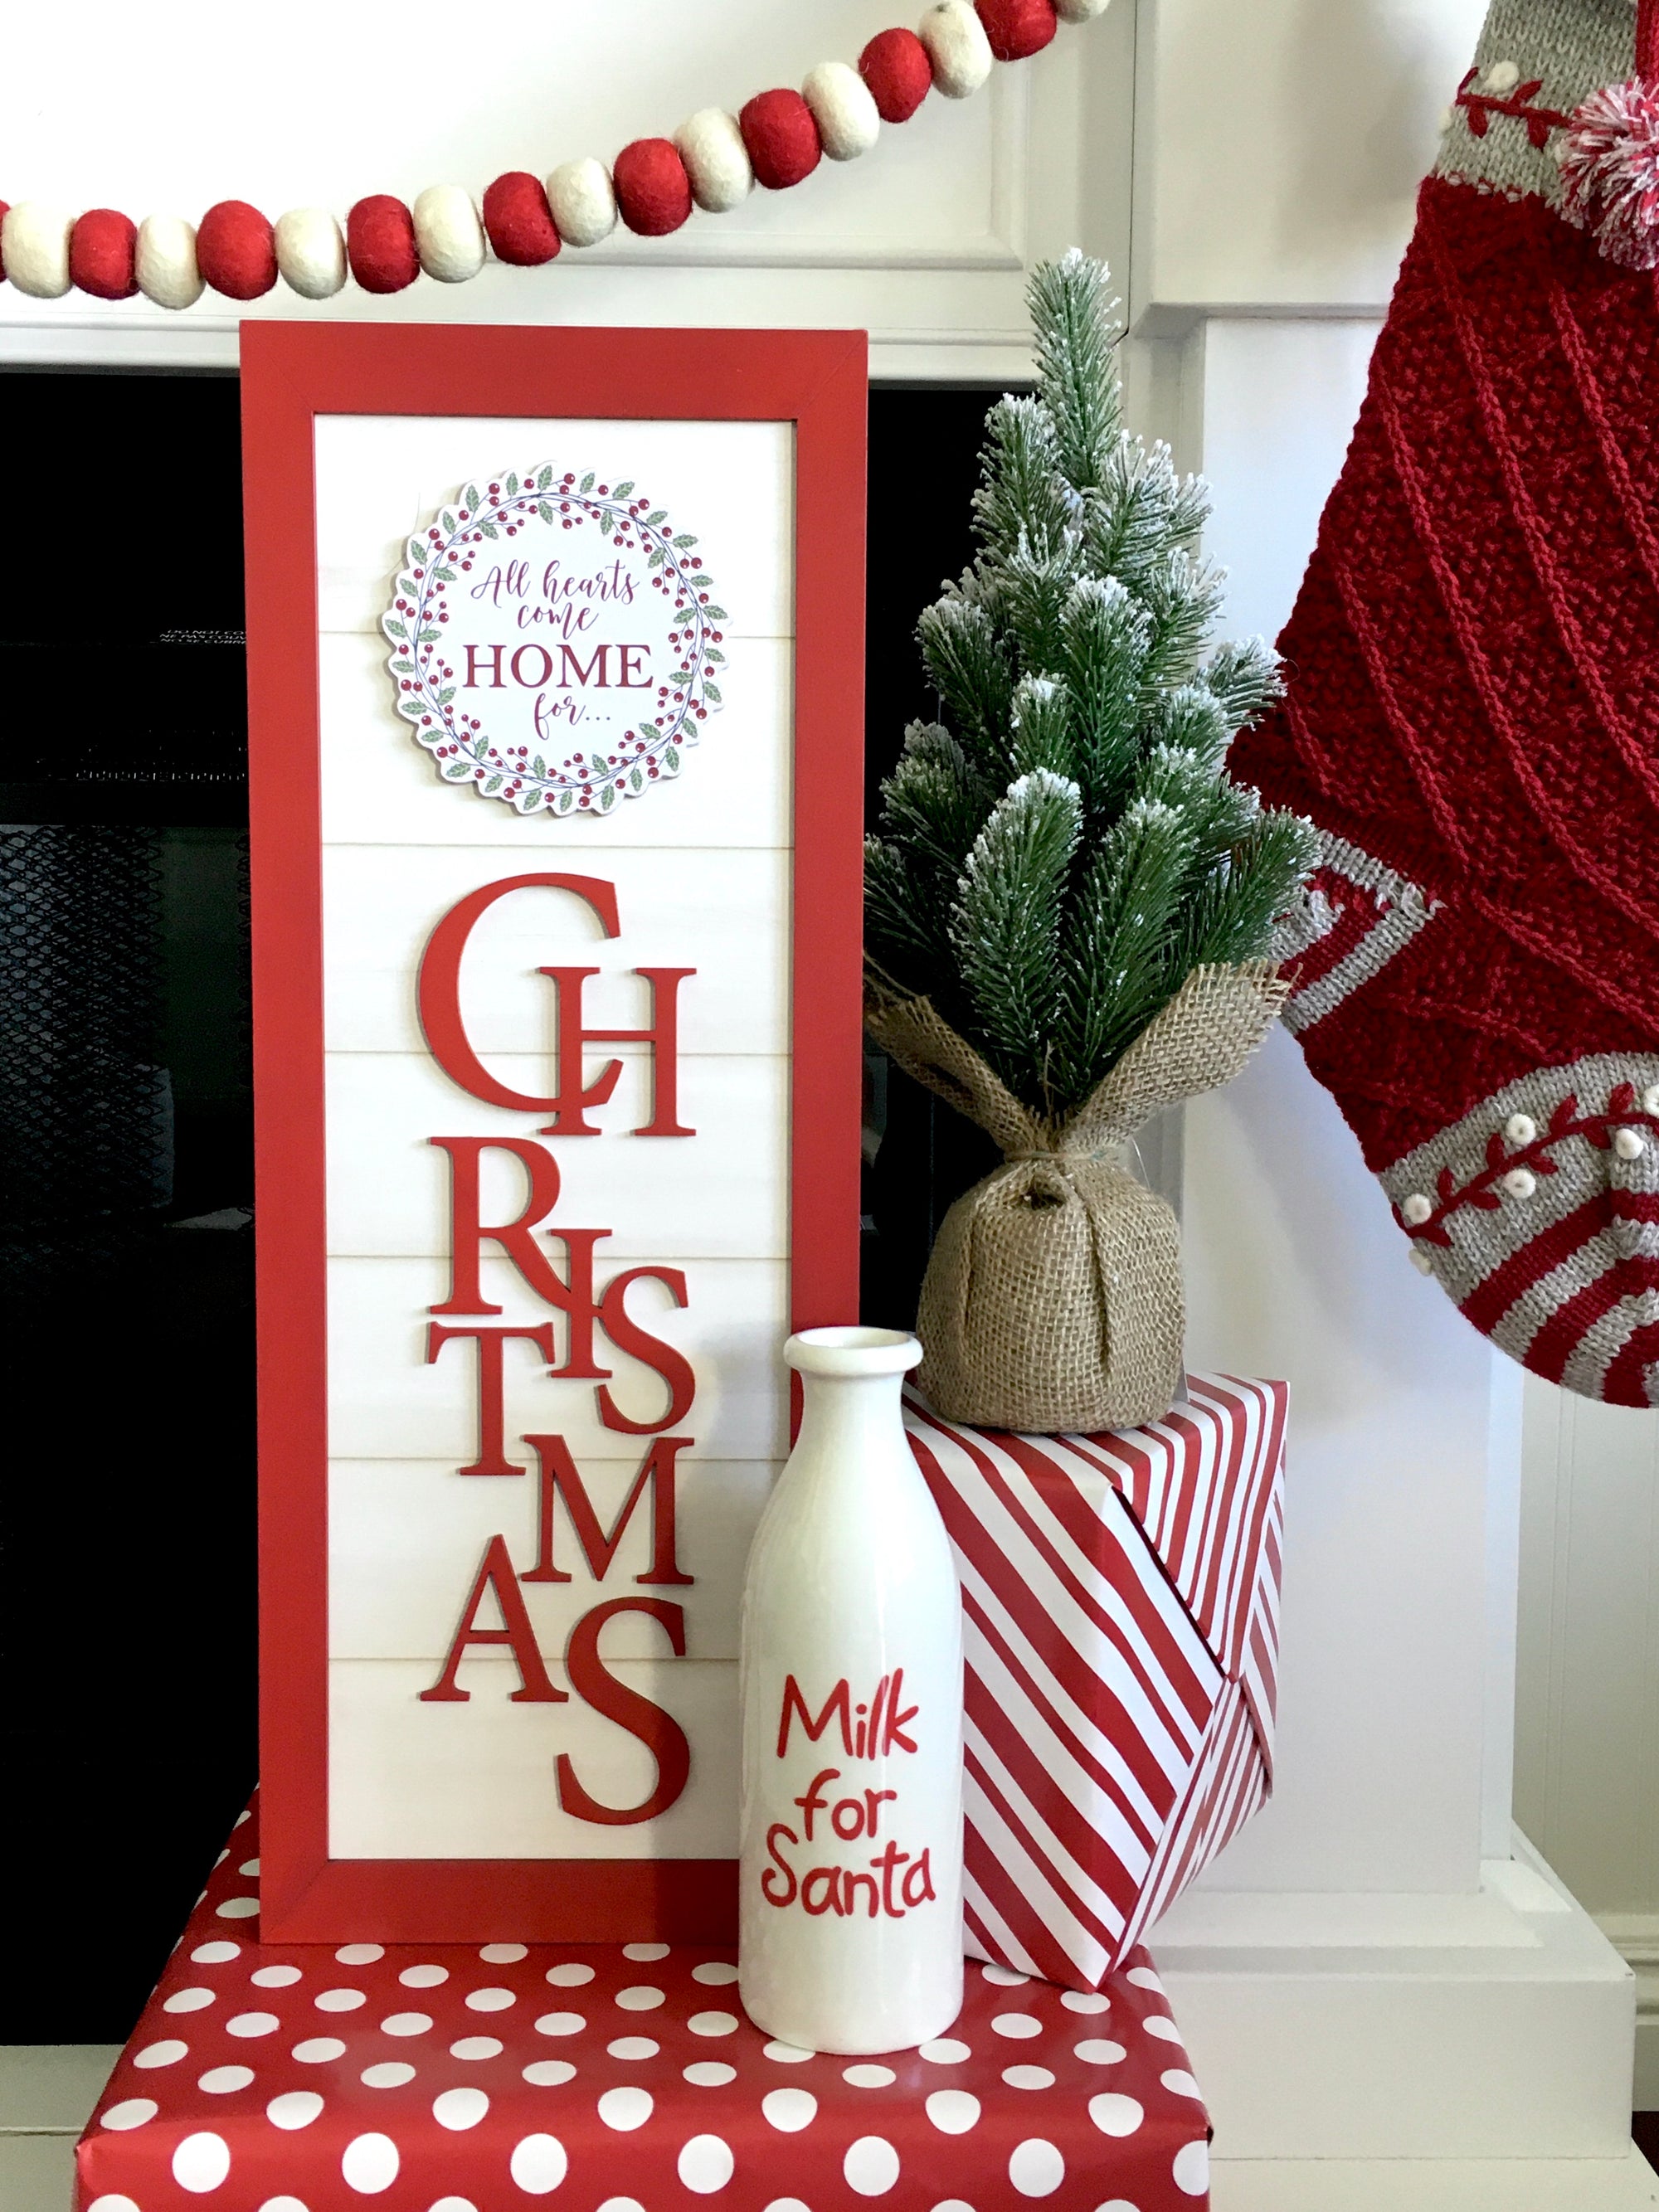 All hearts come home for Christmas shiplap wood sign, tall Christmas sign for fireplace, mantel, or shelf.  Handmade Christmas decorations, Holiday gift ideas, Christmas gifts to make, Christmas signs